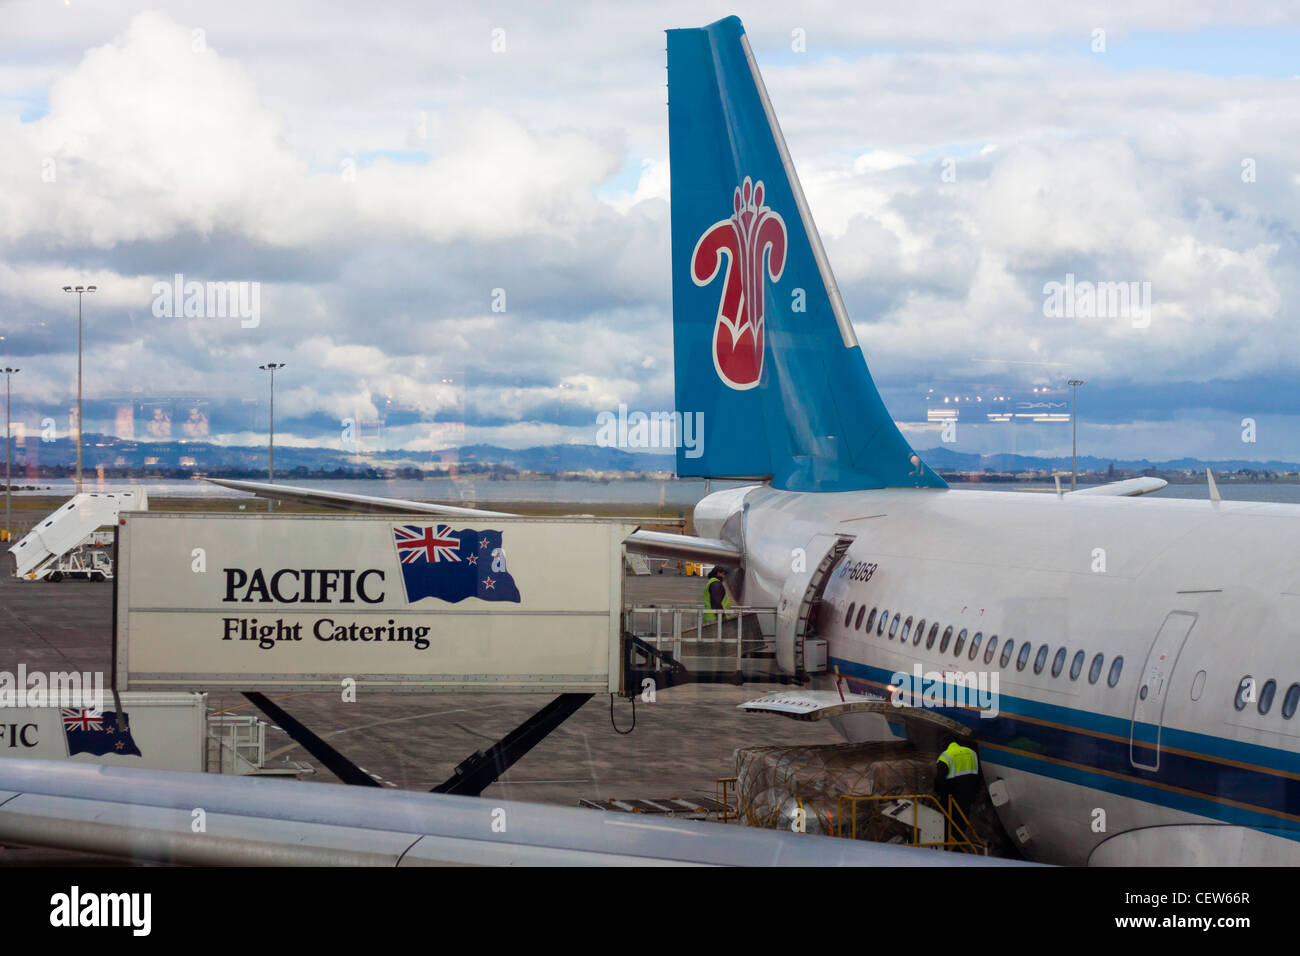 Pacific Flight Catering und Detail der China Southern Airlines Airbus A330-243 in Auckland International Airport in Neuseeland. Stockfoto